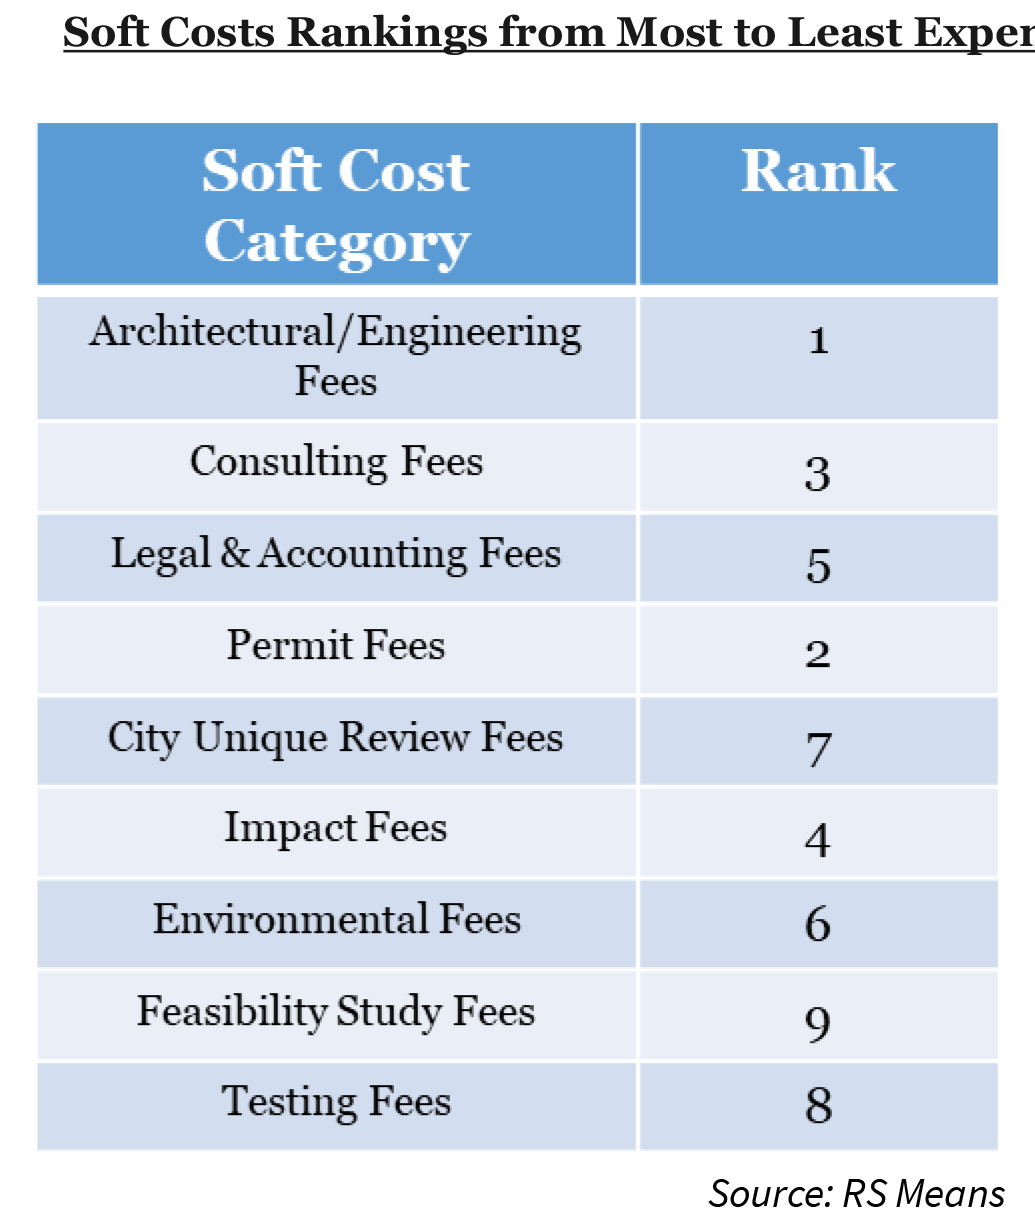 Soft Costs Rankings from Most to Least Expensive